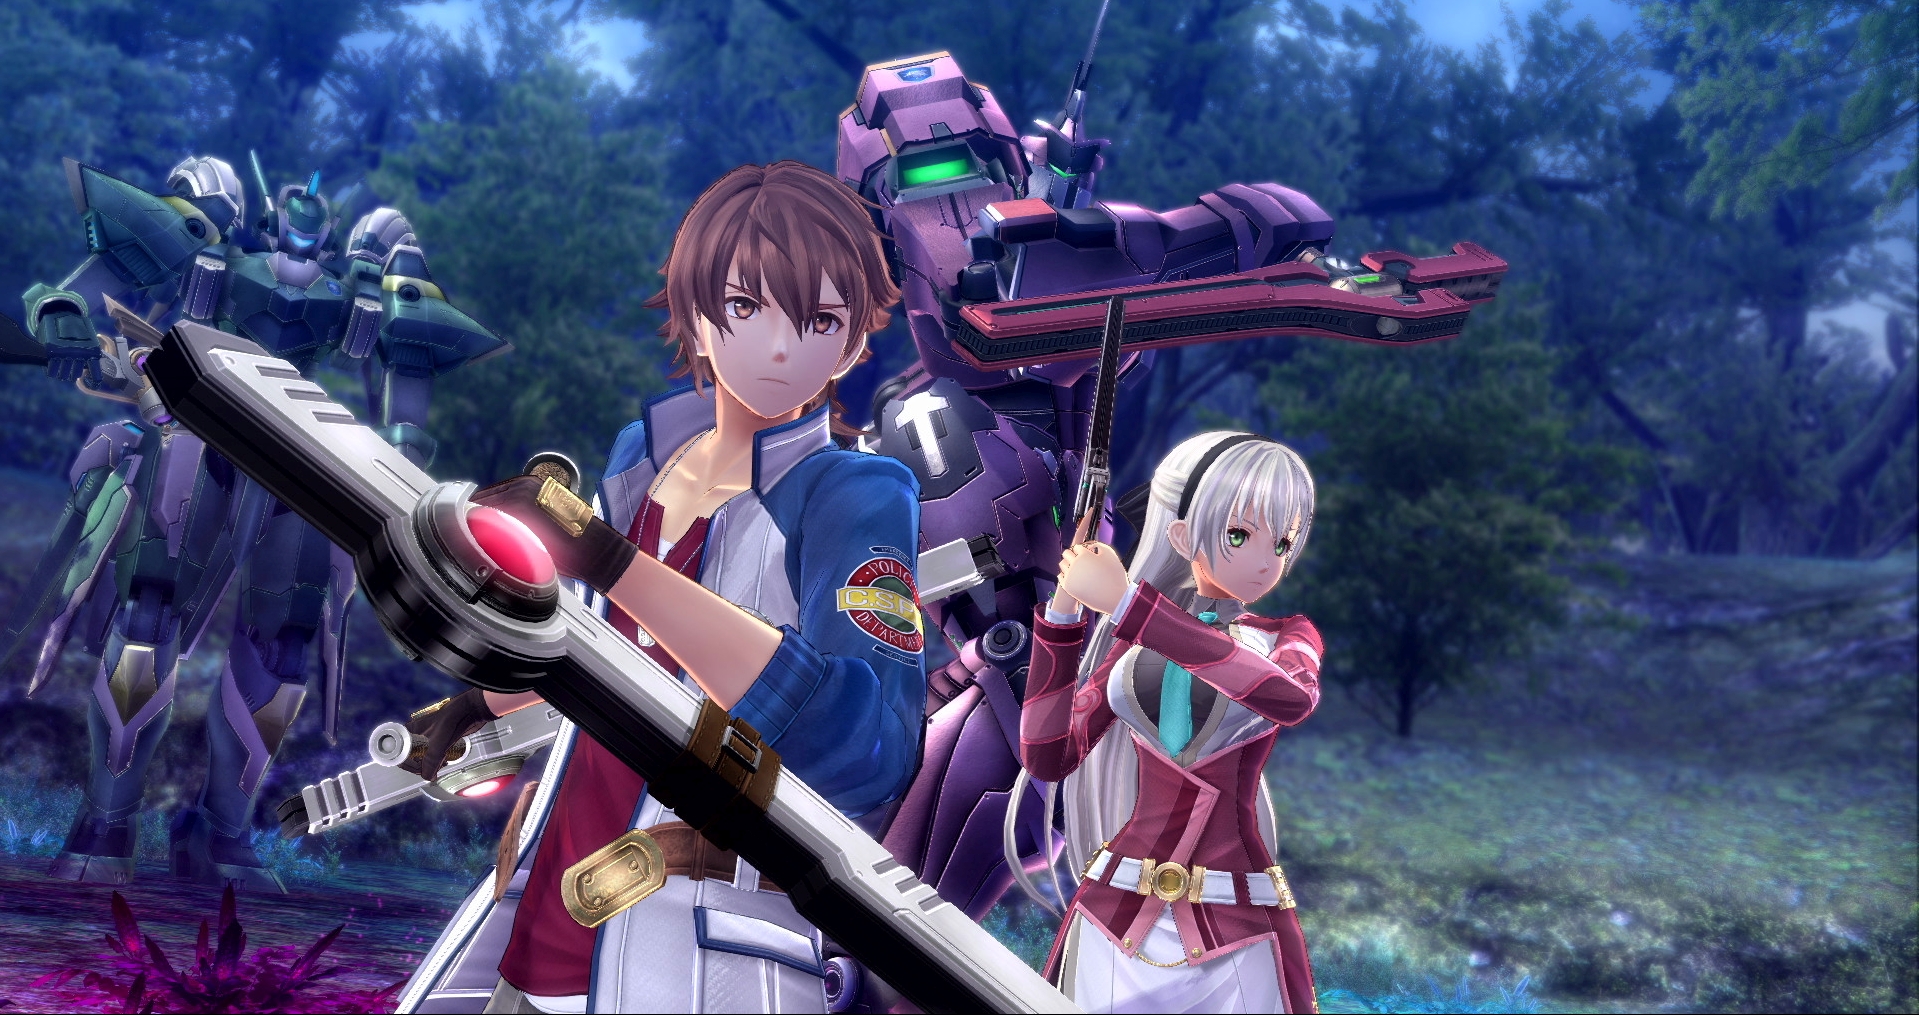 The Legend of Heroes: Trails of Cold Steel 4 PlayStation 4 Digital Deluxe Edition Preorders Now Available